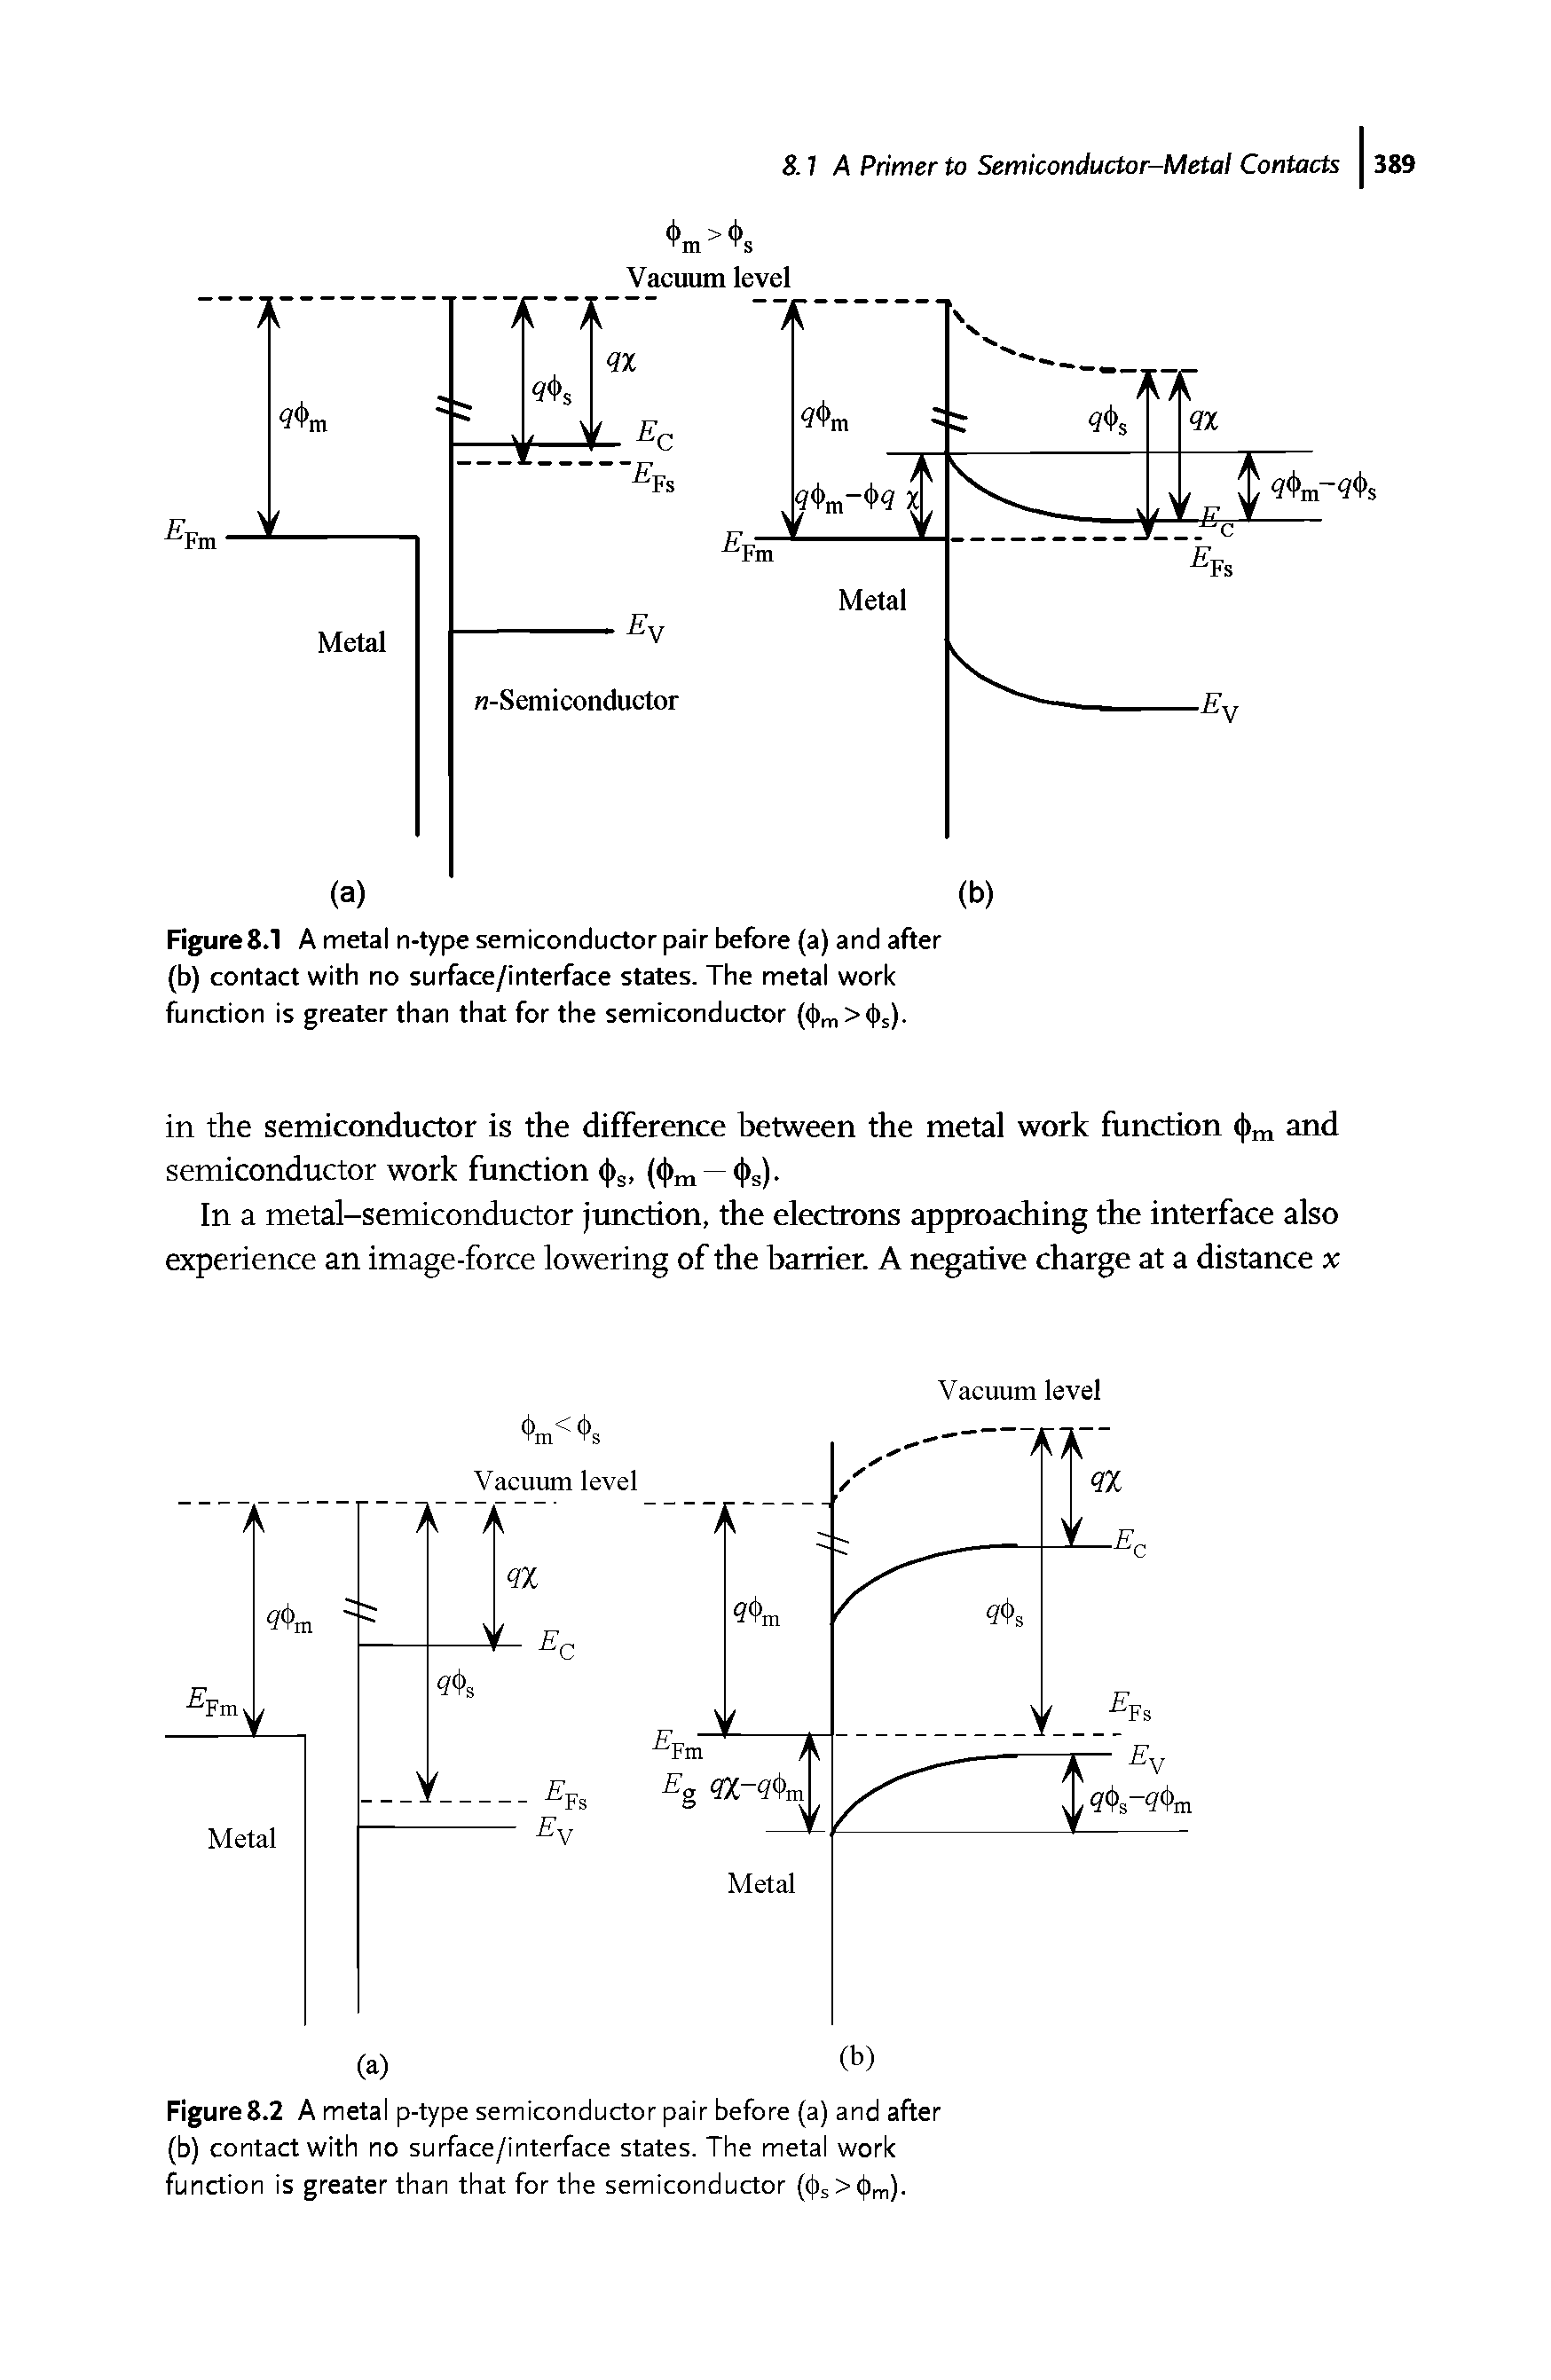 Figure8.1 A metal n-type semiconductor pair before (a) and after (b) contact with no surface/interface states. The metal work function is greater than that for the semiconductor (0m>0s)-...